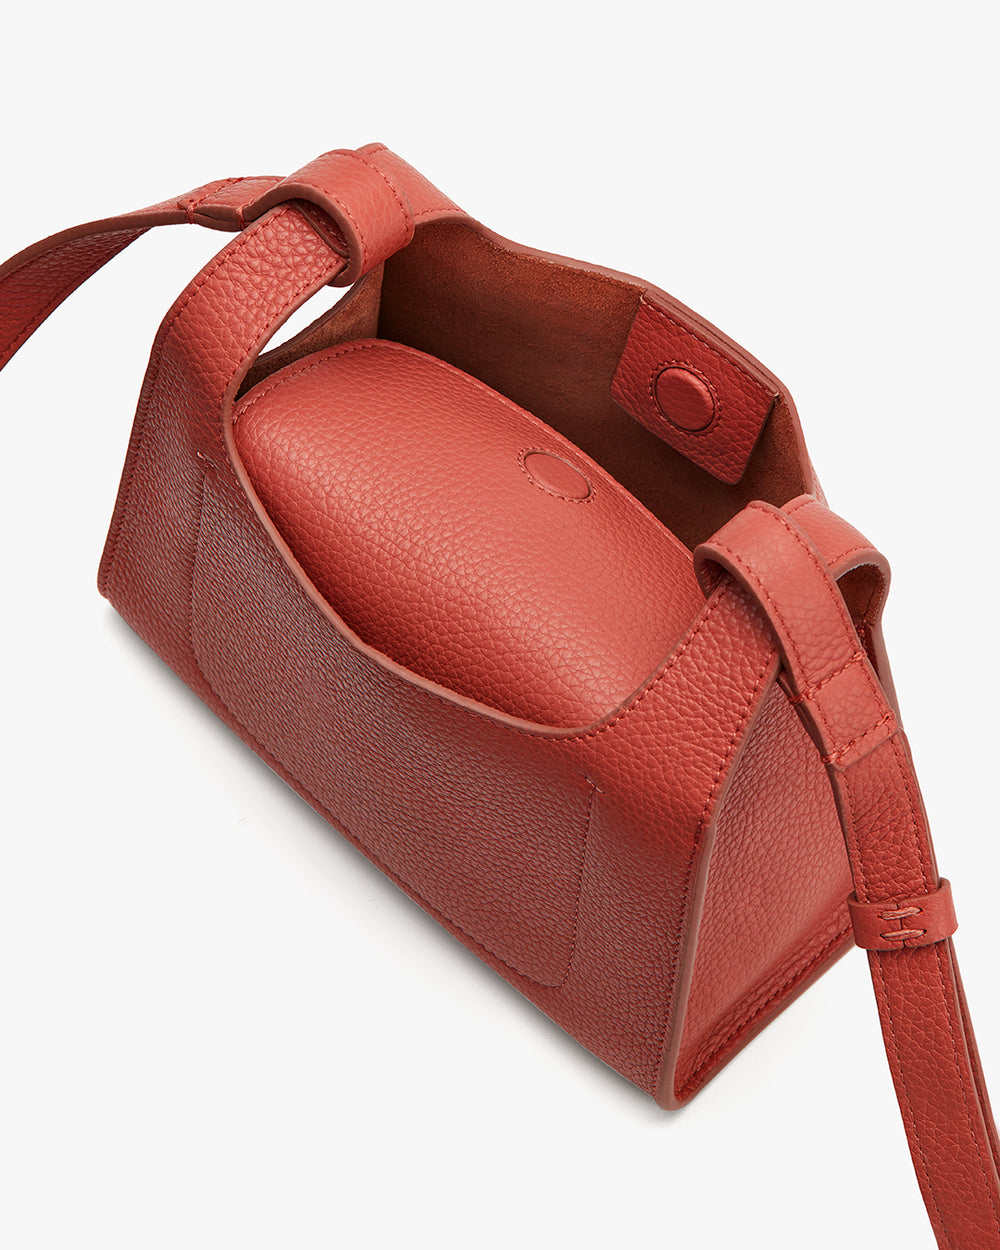 Open handbag with a shoulder strap and visible inner compartment.